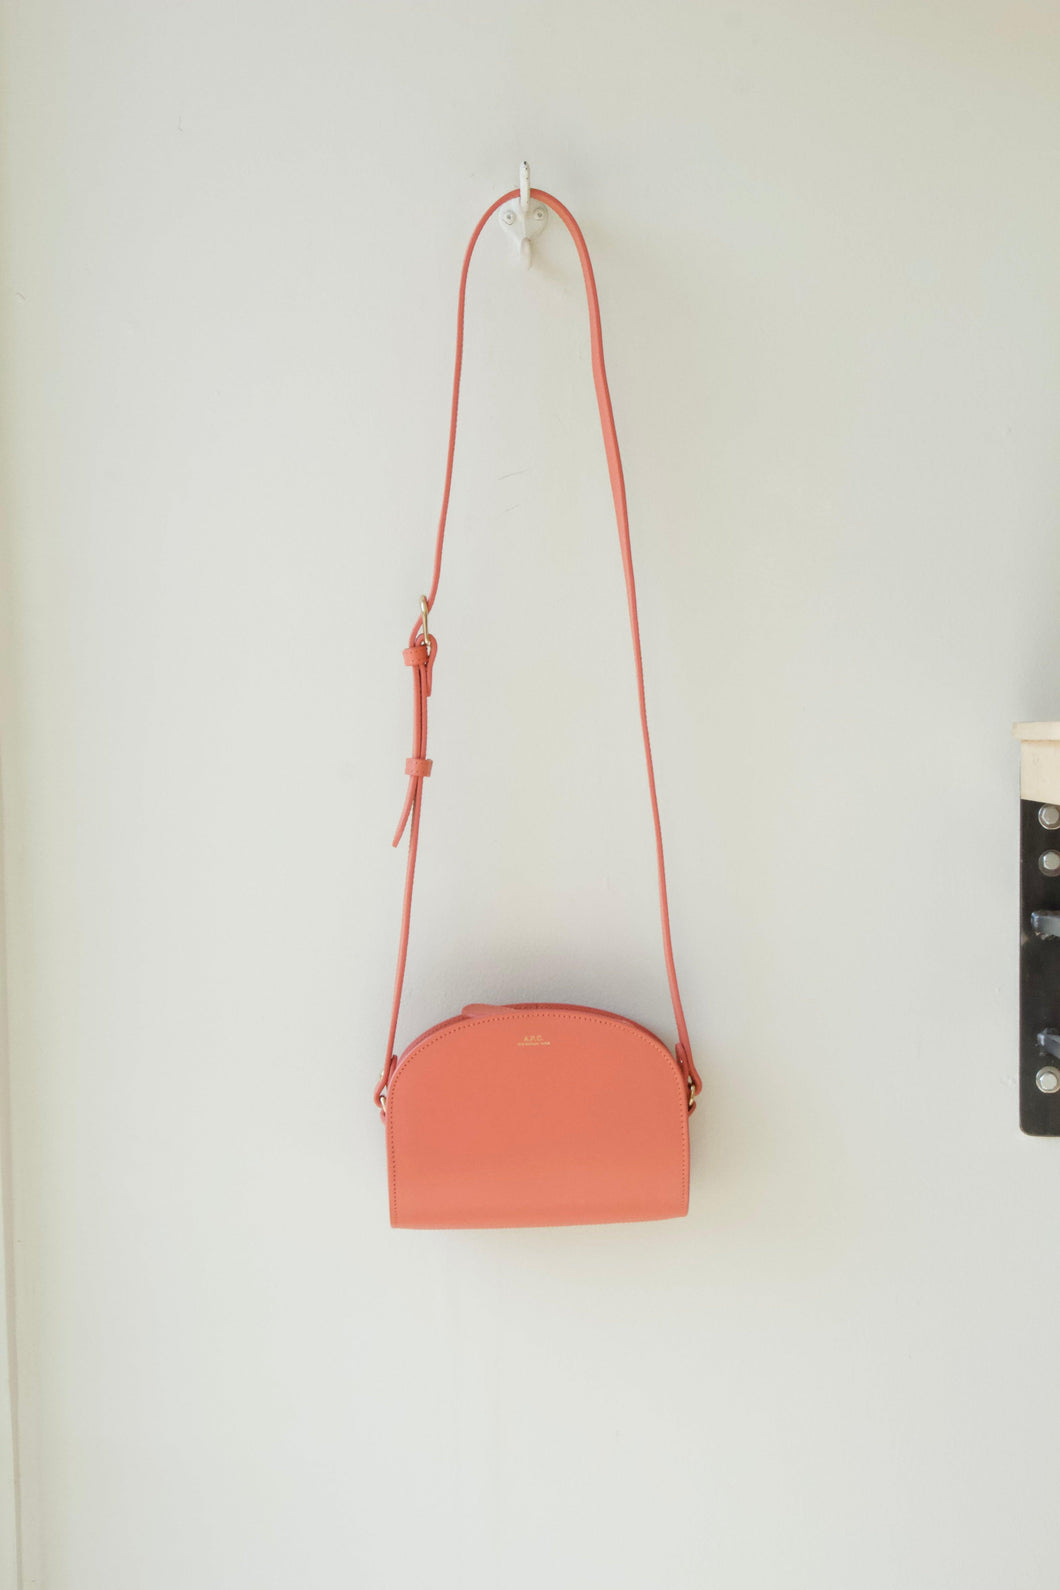 The demi-lune mini bag in Coral - this signature leather bag from APC is a true coral colour, a soft pink hue with hints of orange